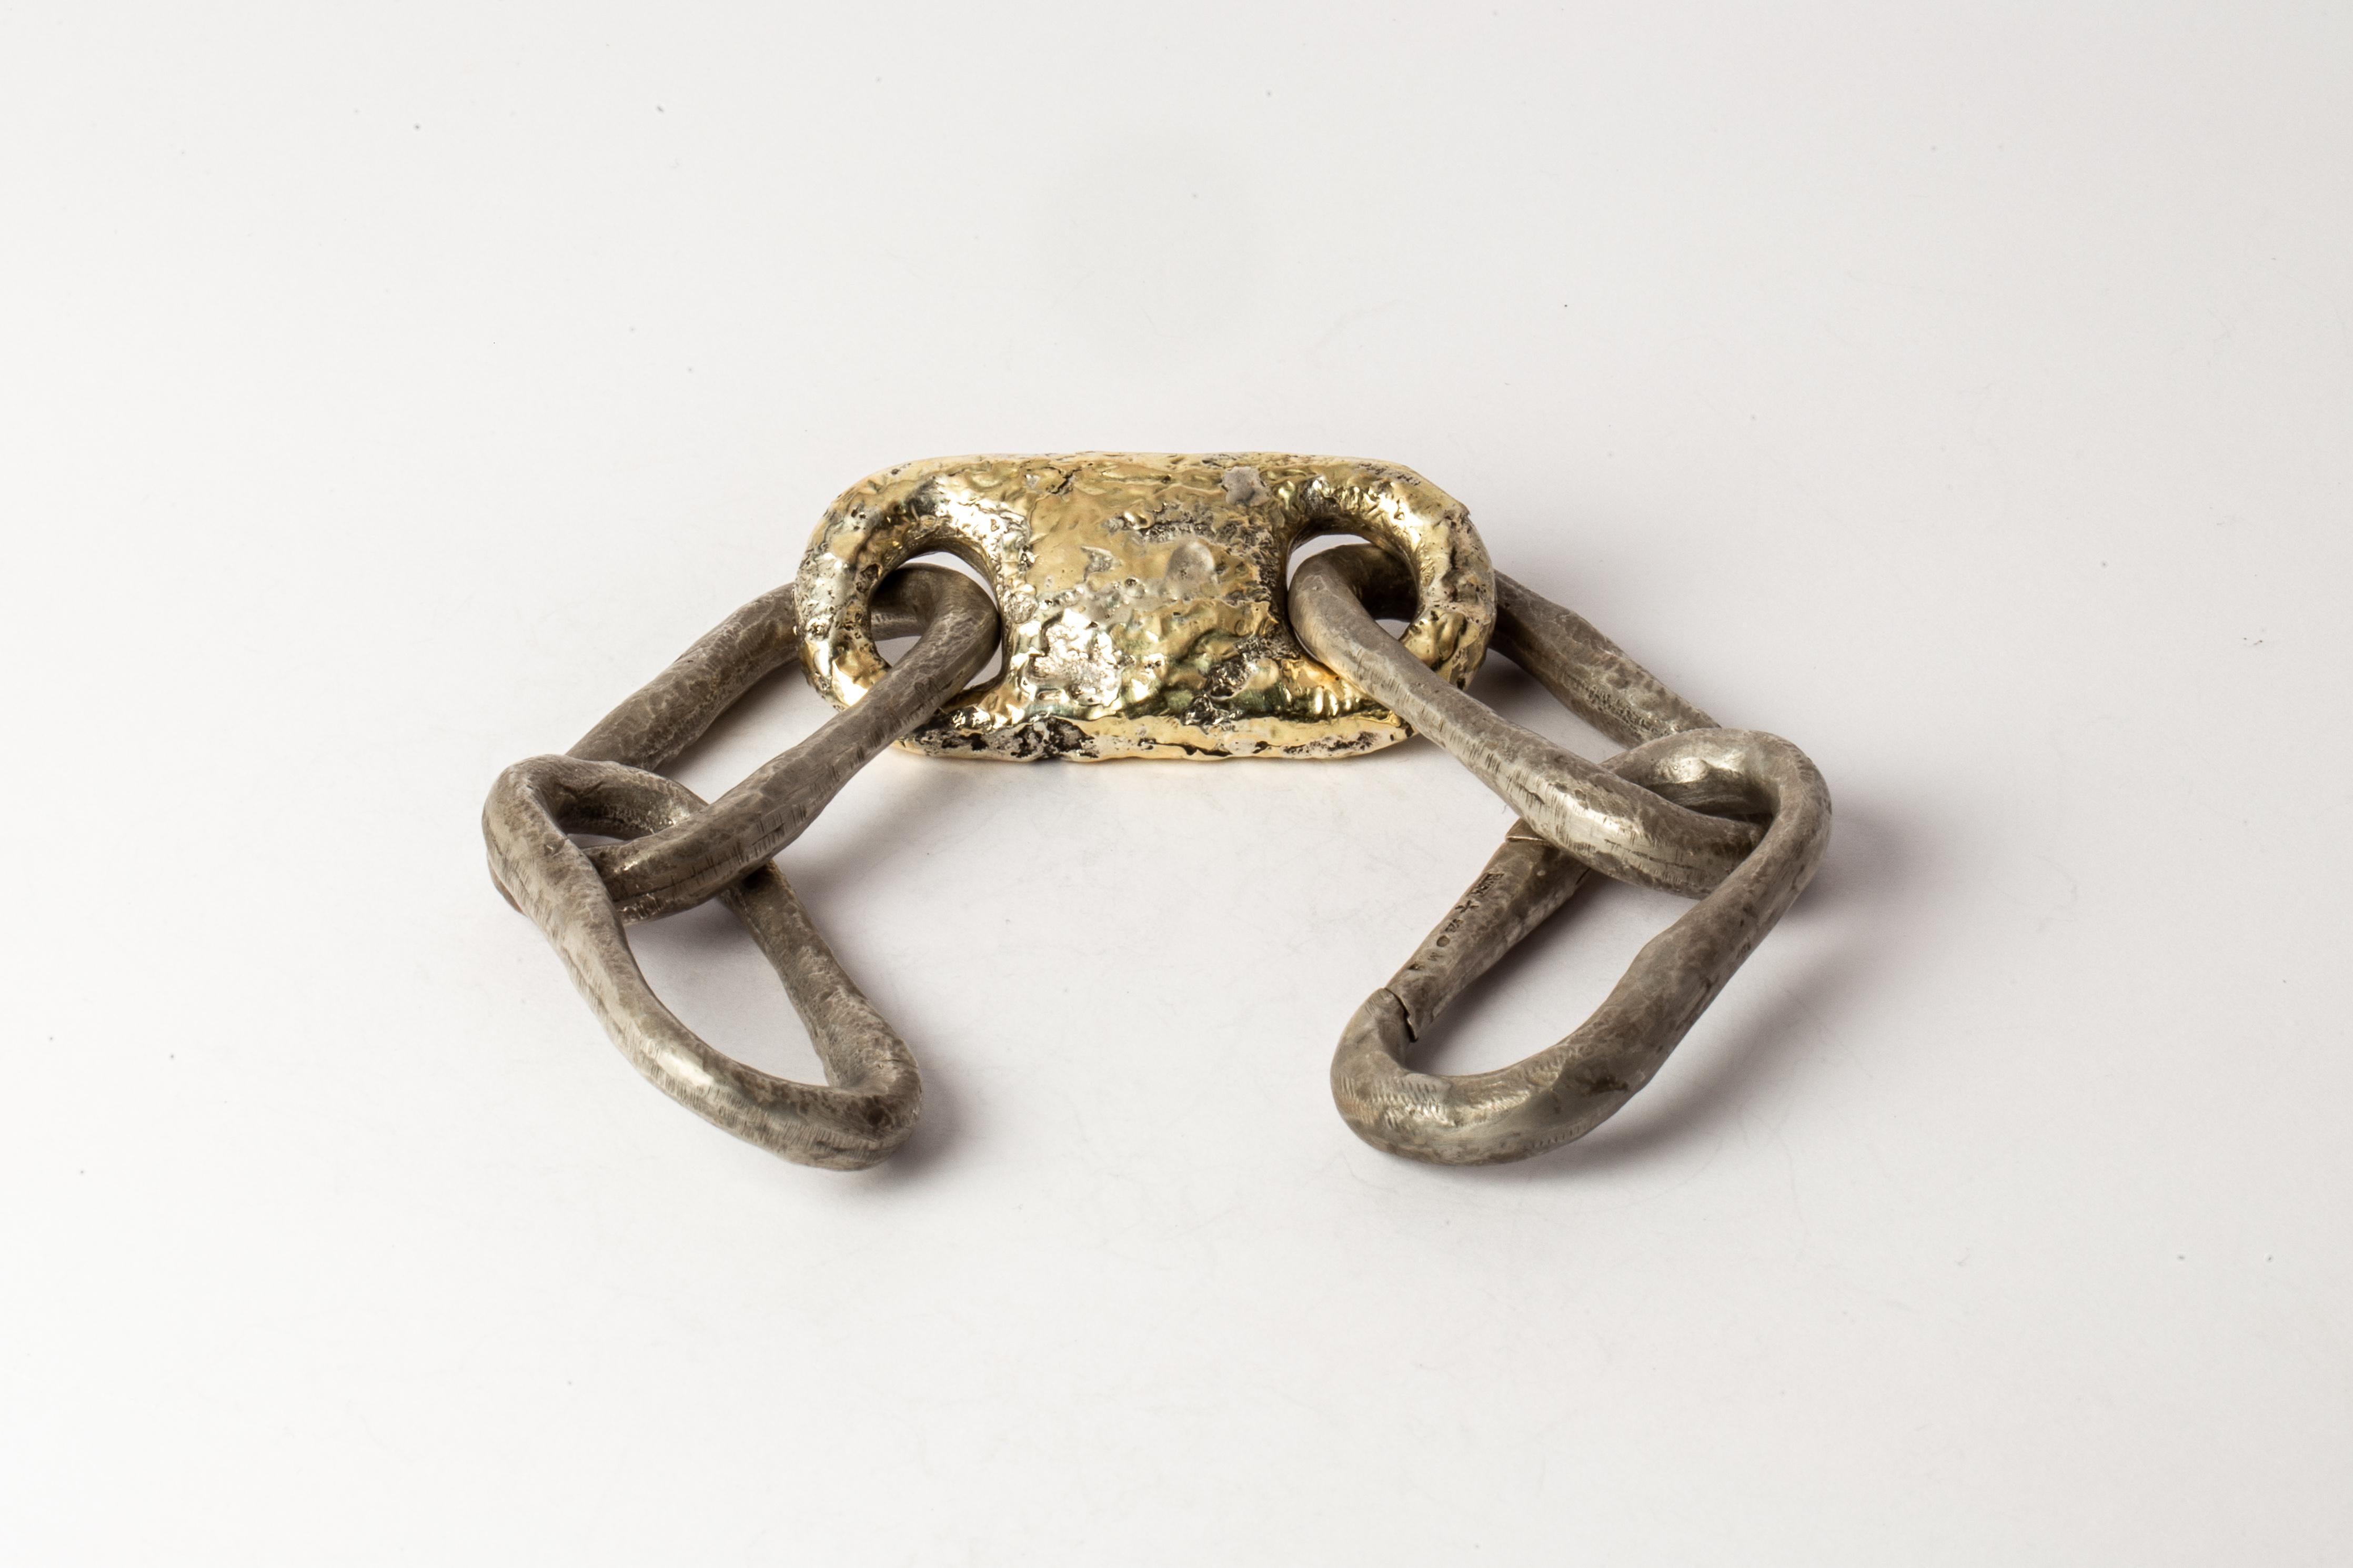 Roman Large Link Bracelet w/ Large Closed Link (Fuse, DA18K) In New Condition For Sale In Hong Kong, Hong Kong Island